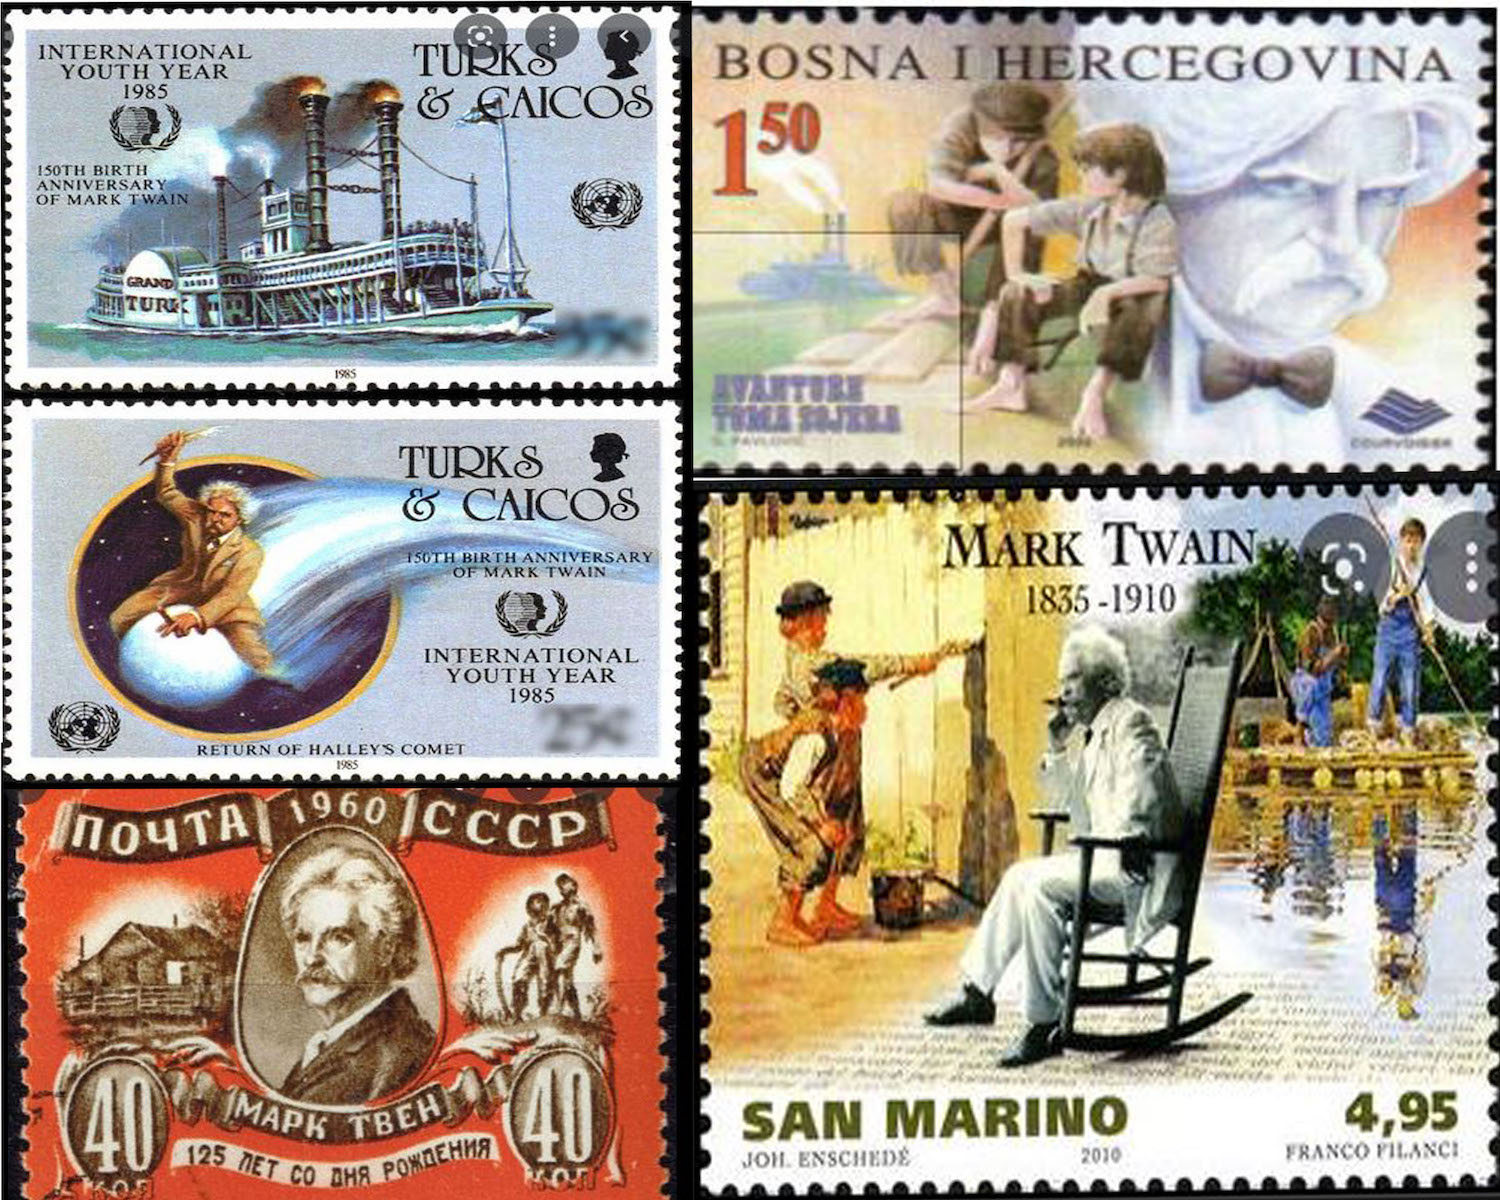 Mark Twain's new postal stamp: you may not be able to beat the old satirist  but now you can lick him - The Washington Post